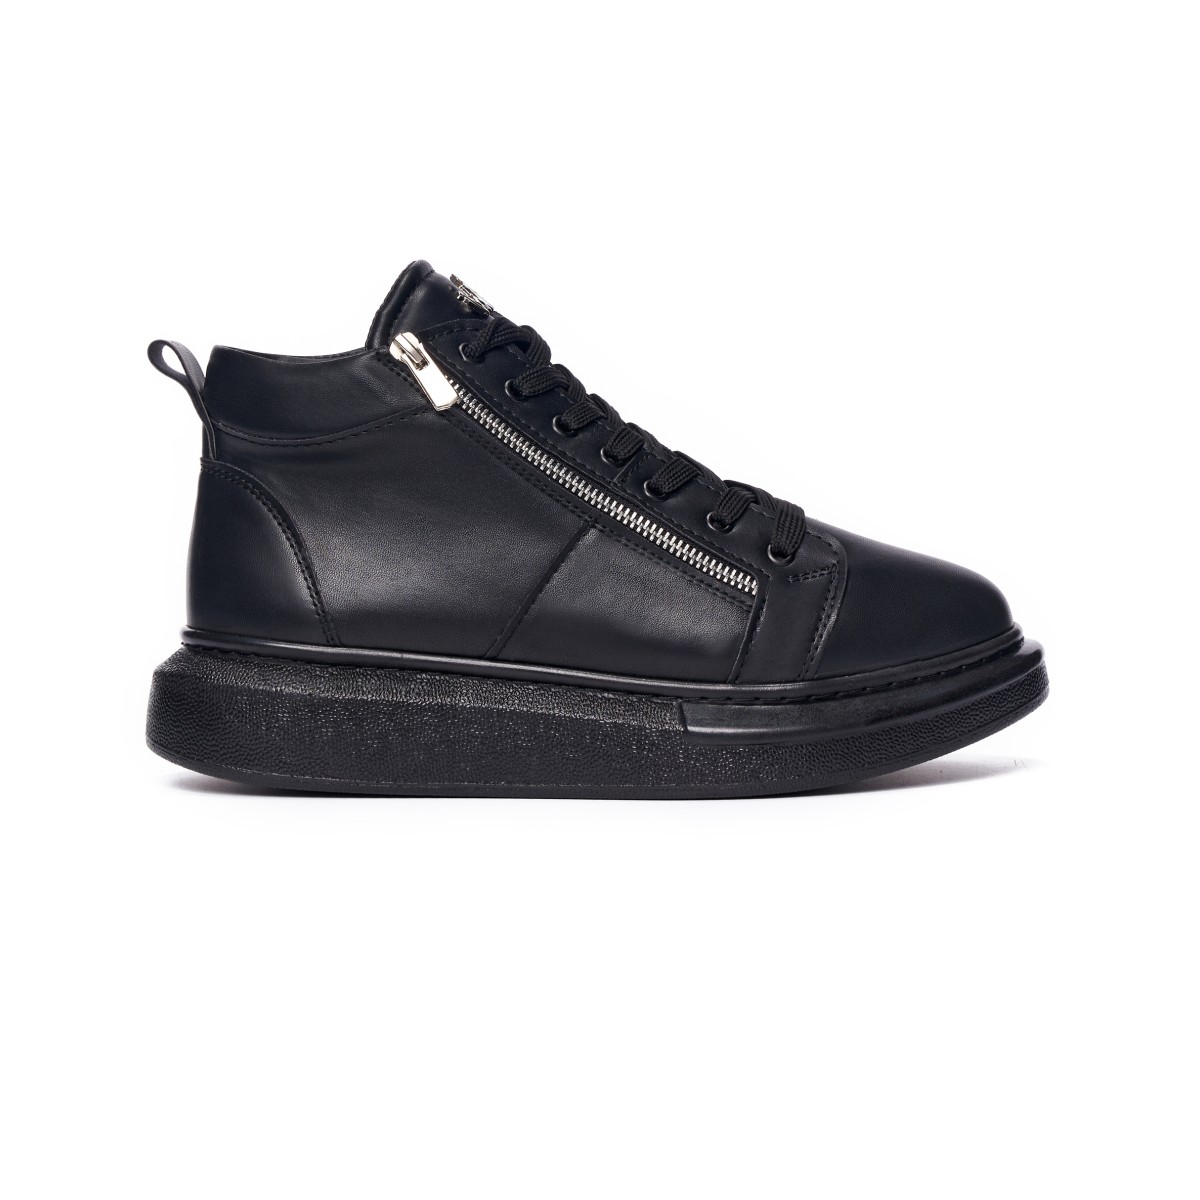 Hype Sole Zipped Style High Top Sneakers in Full Black